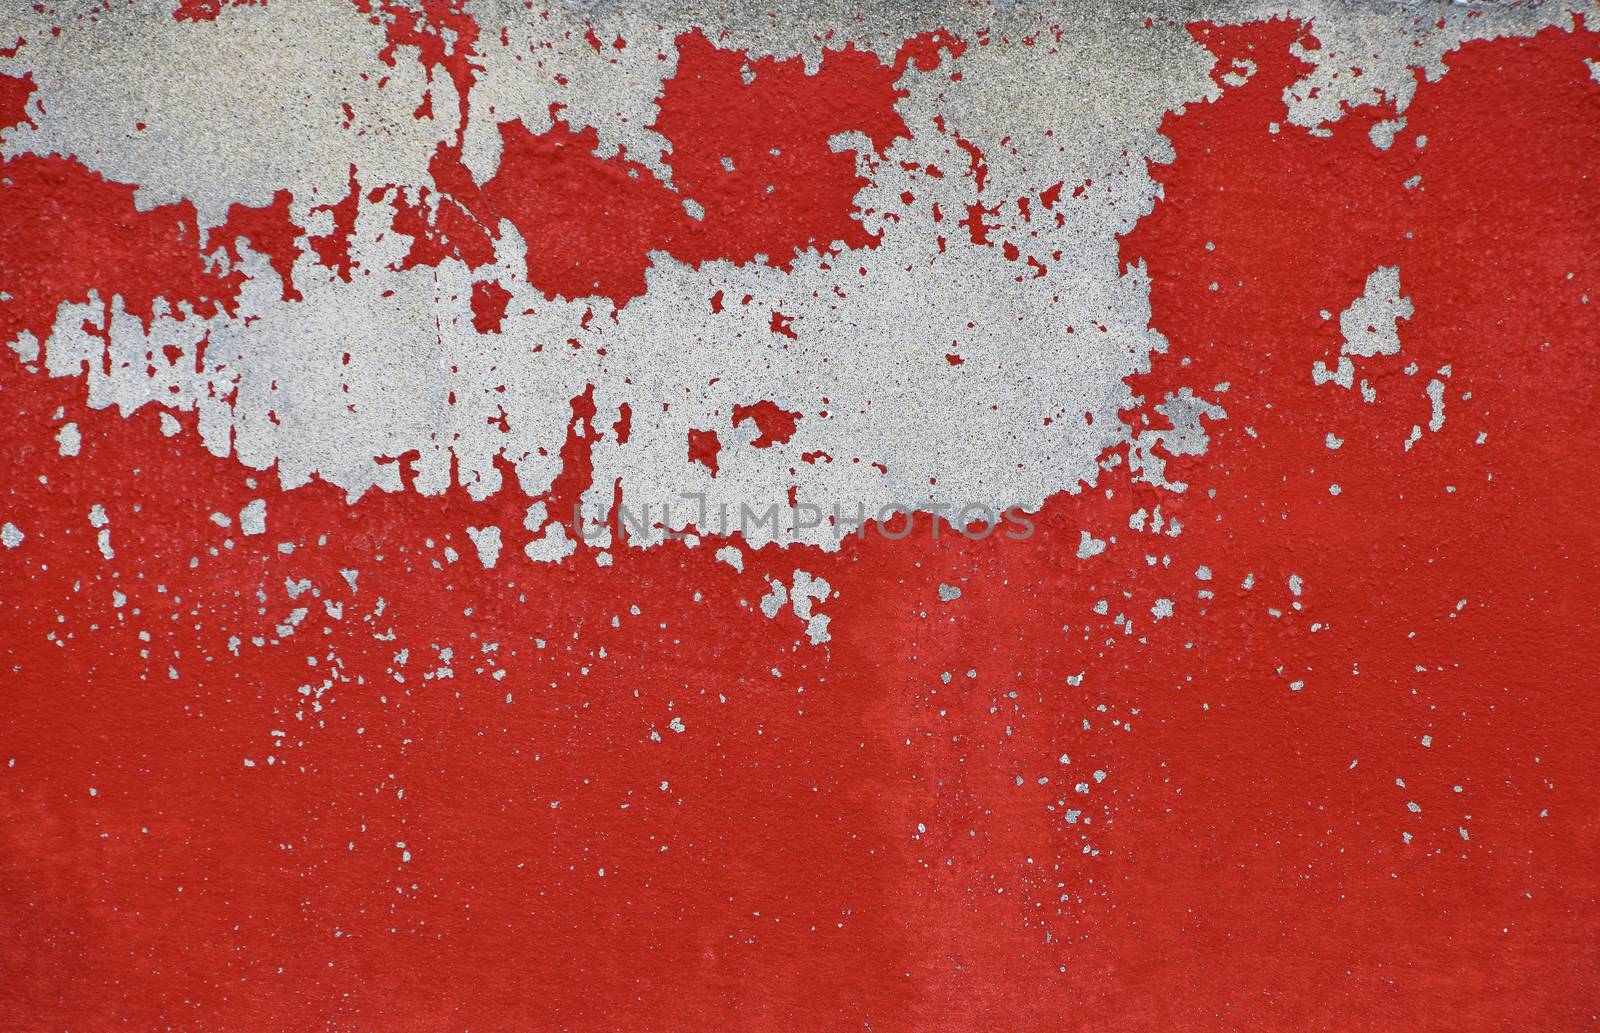 Flakes of old vintage grungy bright vivid red paint on grey concrete wall